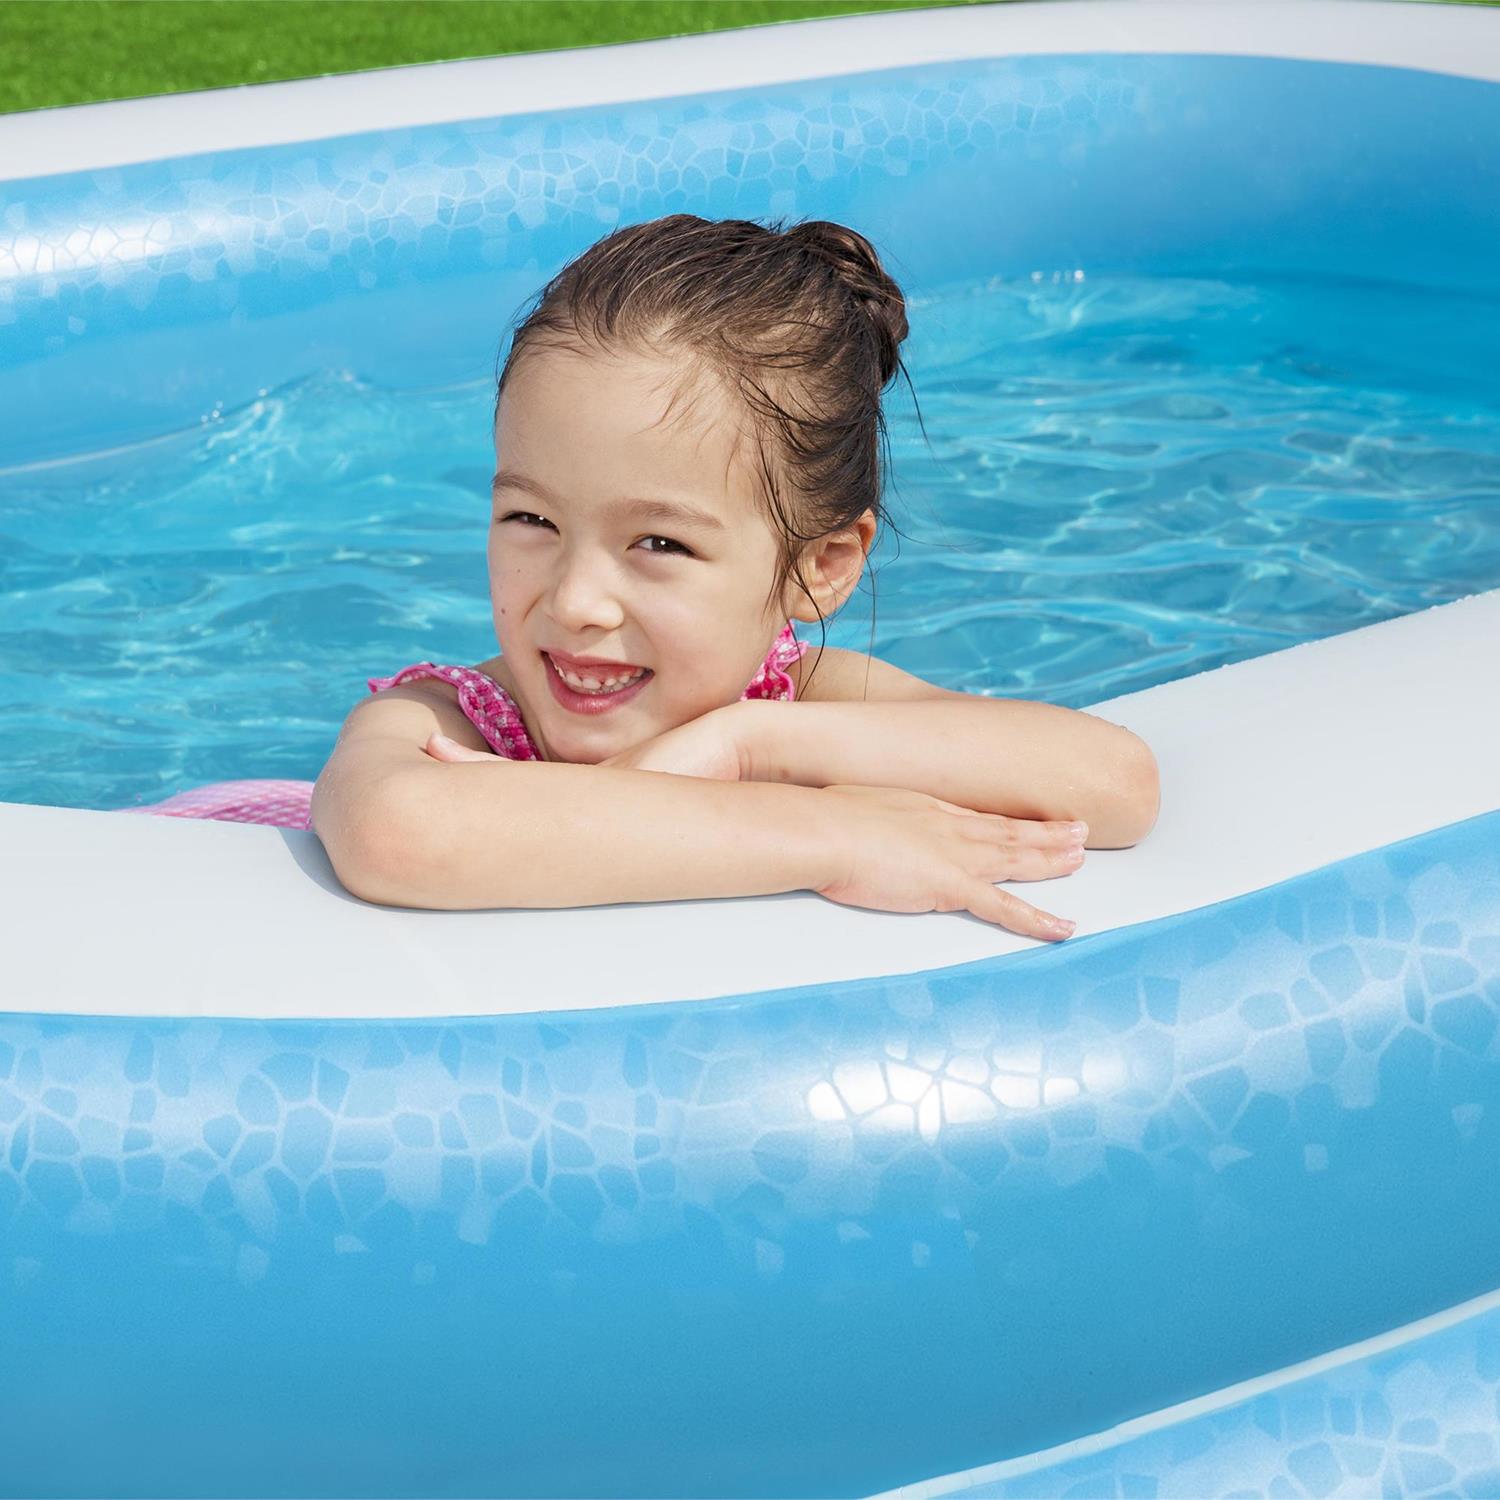 Bestway Inflatable Family Rectangular Pool with Repair Patch, 2.62mx1.75mx51cm